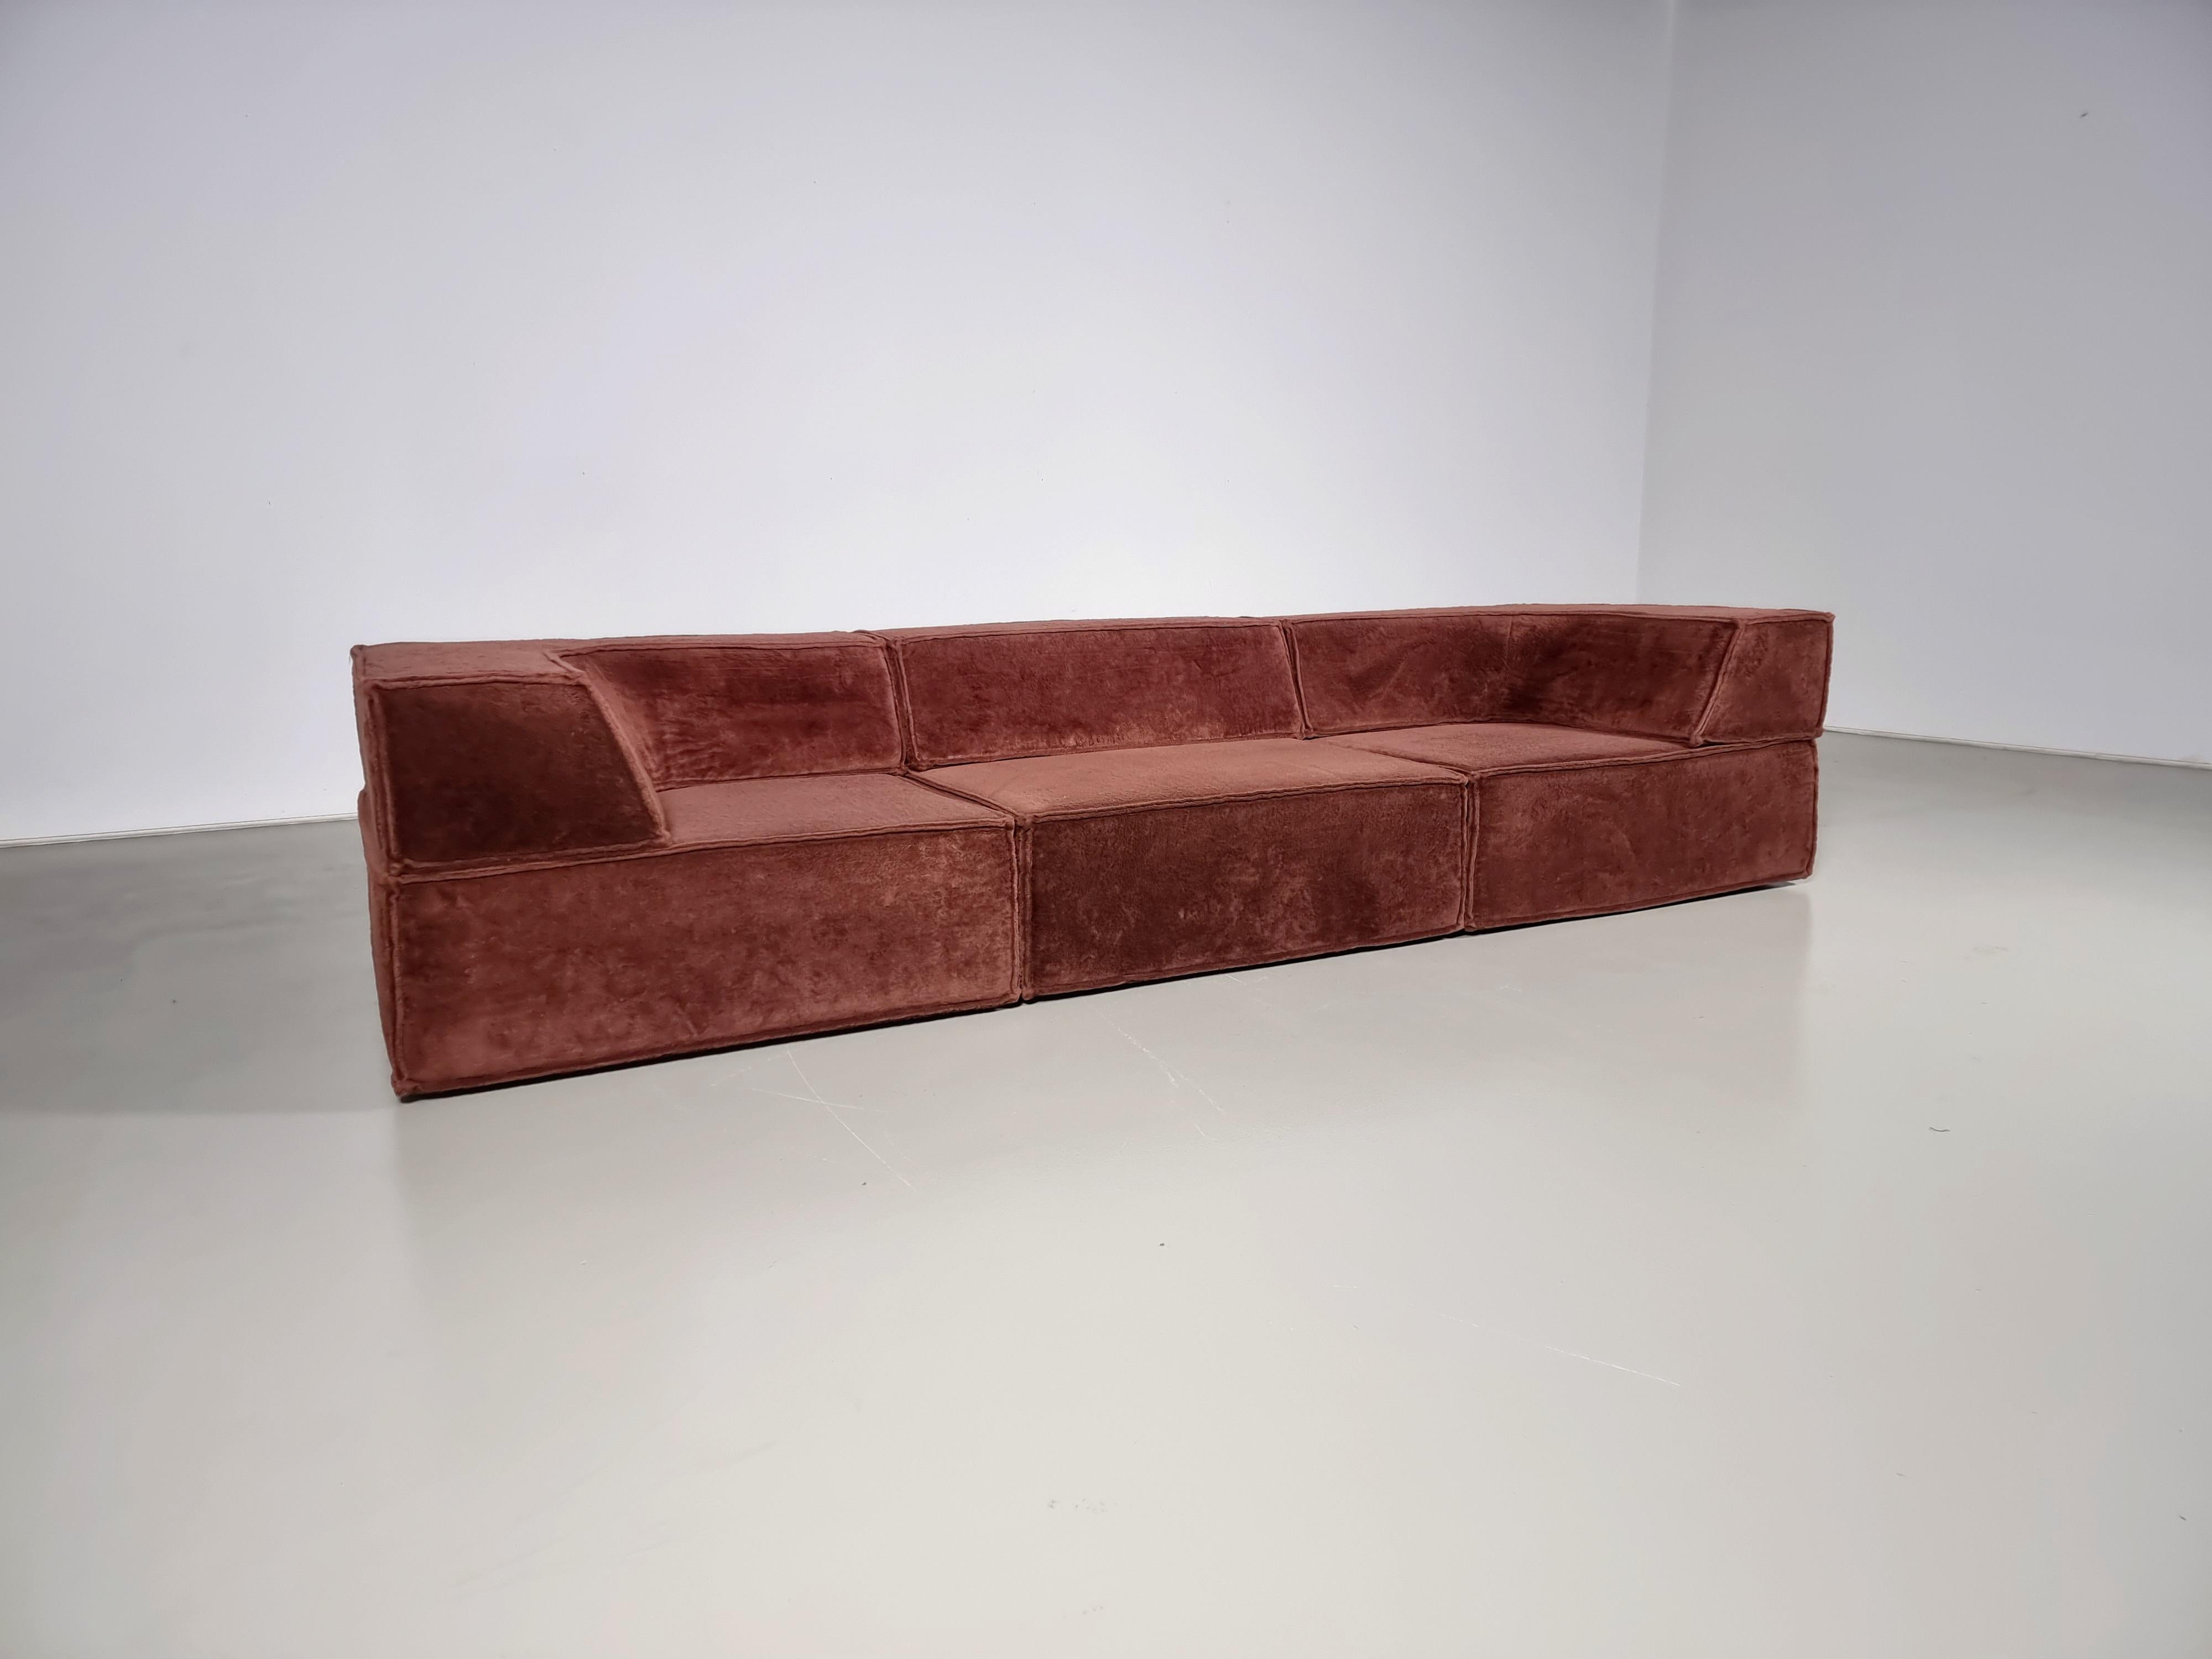 Mid-Century Modern COR Trio Sofa by Team Form Ag for COR Furniture, Germany, 1970s